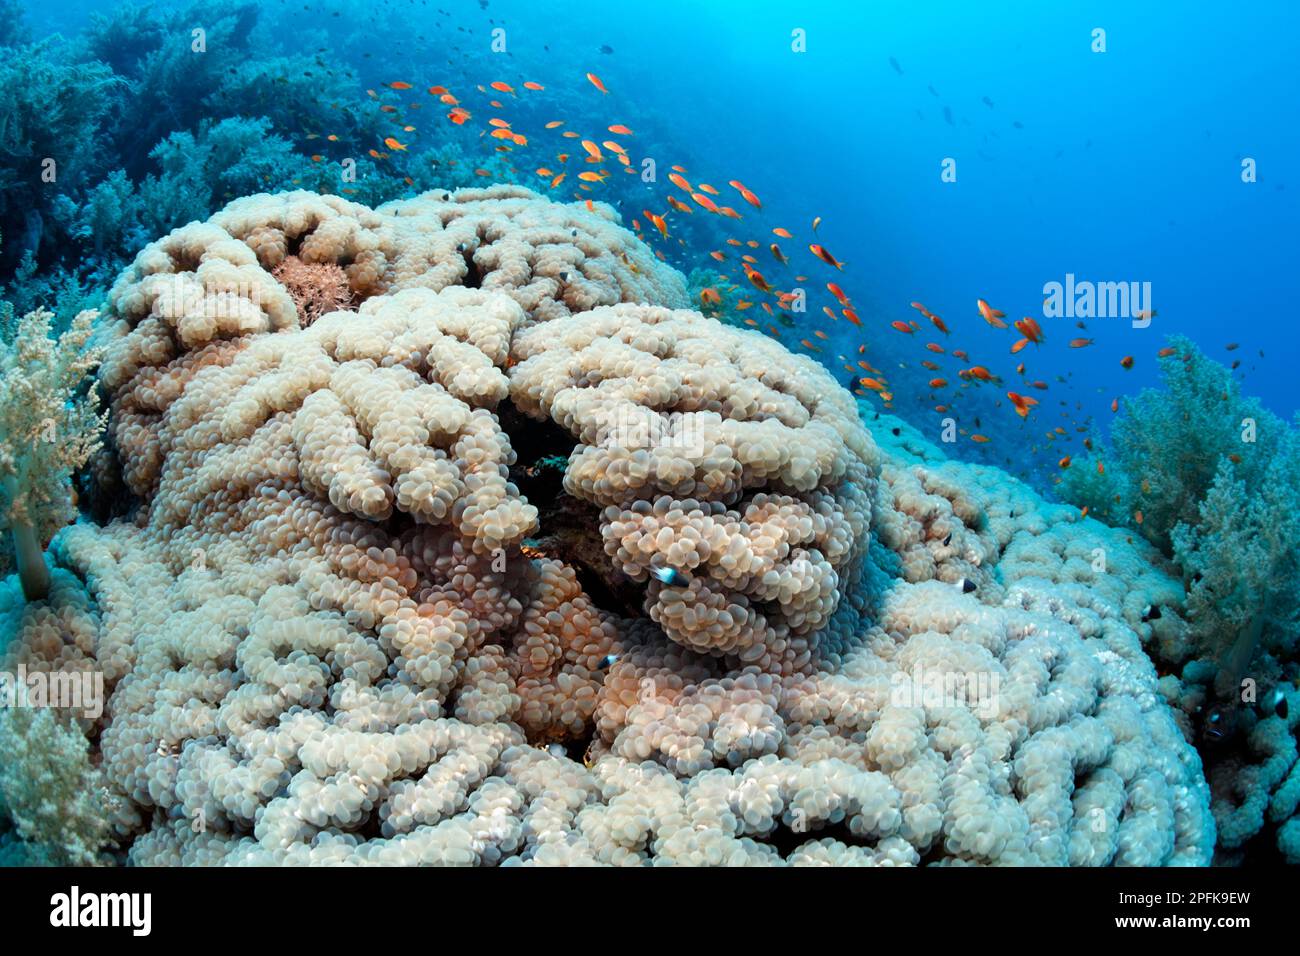 Bubble coral (Plerogyra sinuosa) surrounded by broccoli coral (Litophyton arboreum), above shoal of red sea basslet (Pseudanthias taeniatus), Red Stock Photo